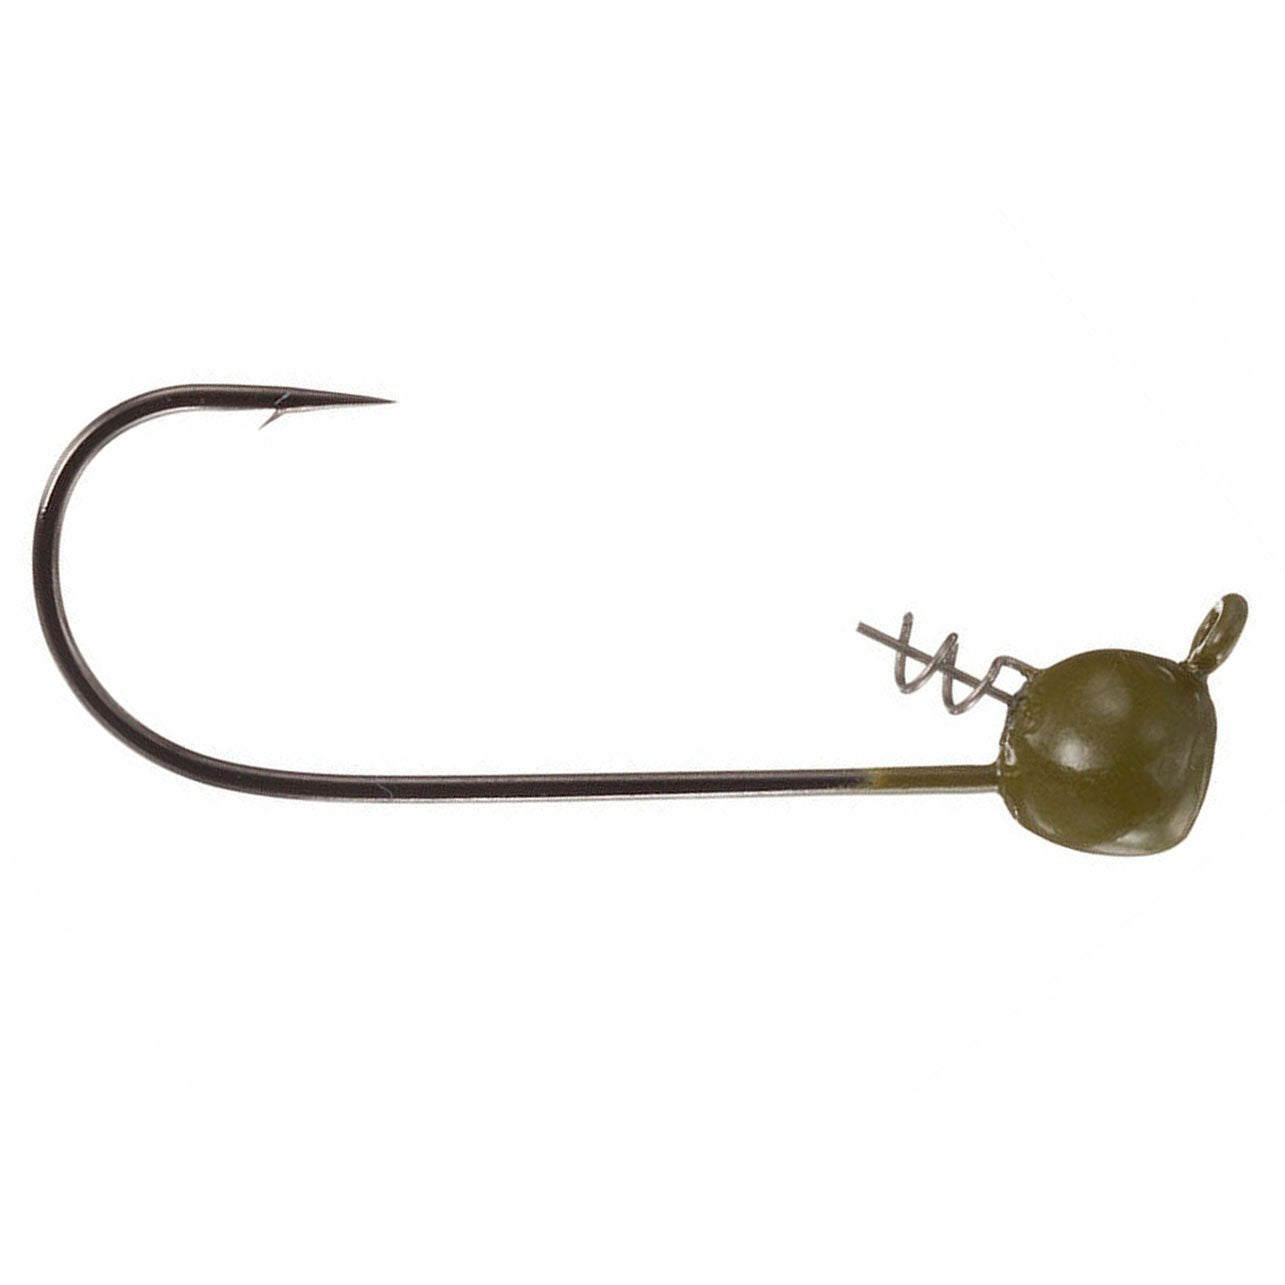 Owner 5151-034 Shaky Head 3/16 OZ Fishing Weighted